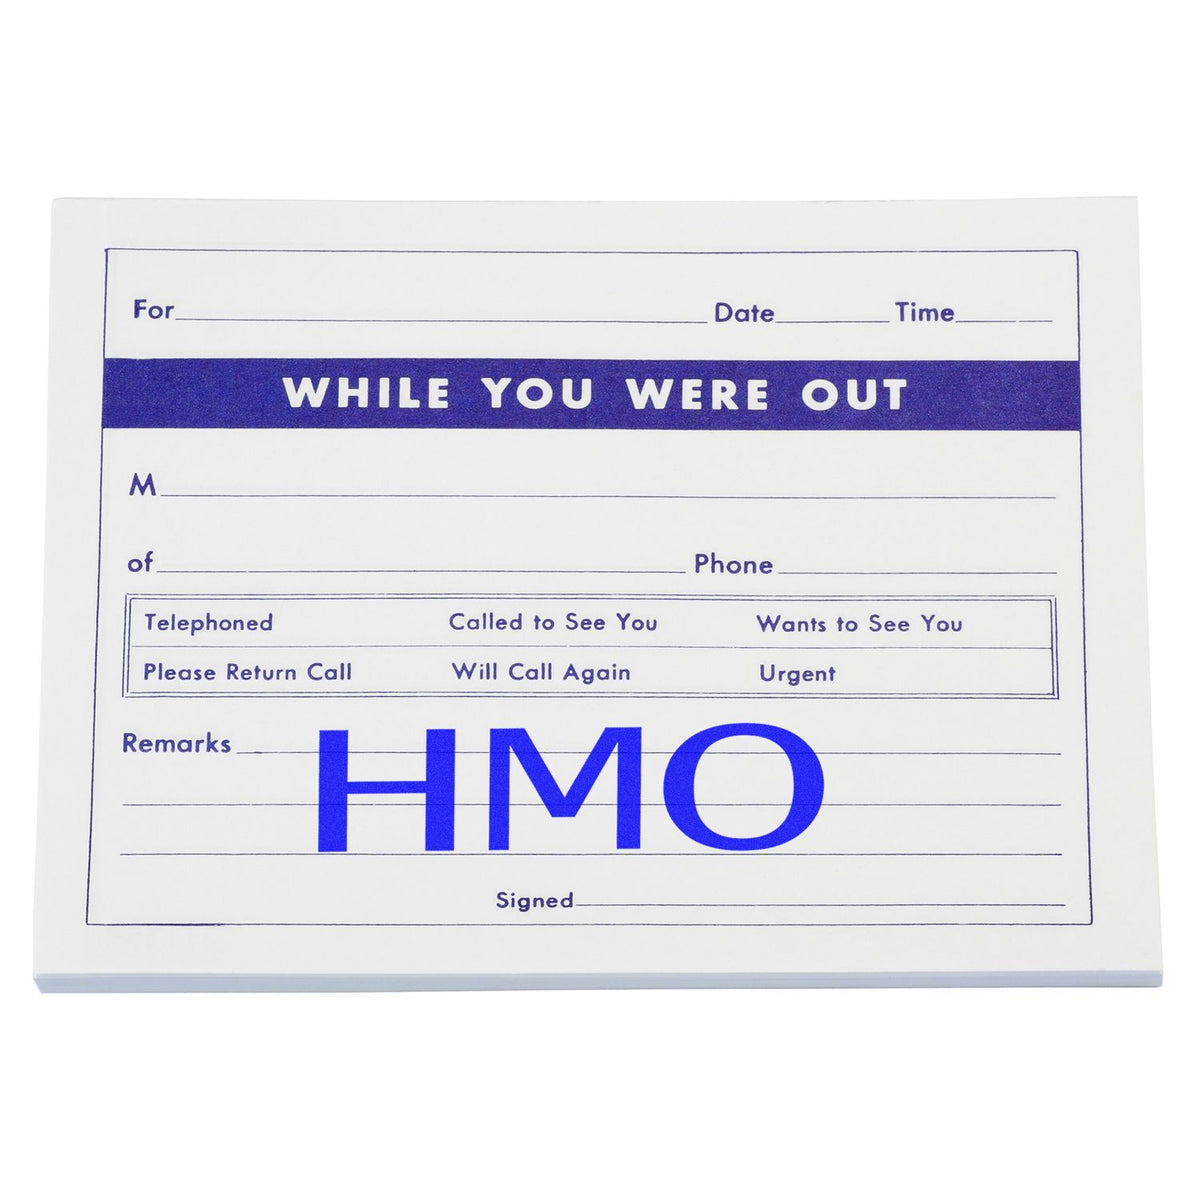 HMO Medical Rubber Stamp In Use Photo